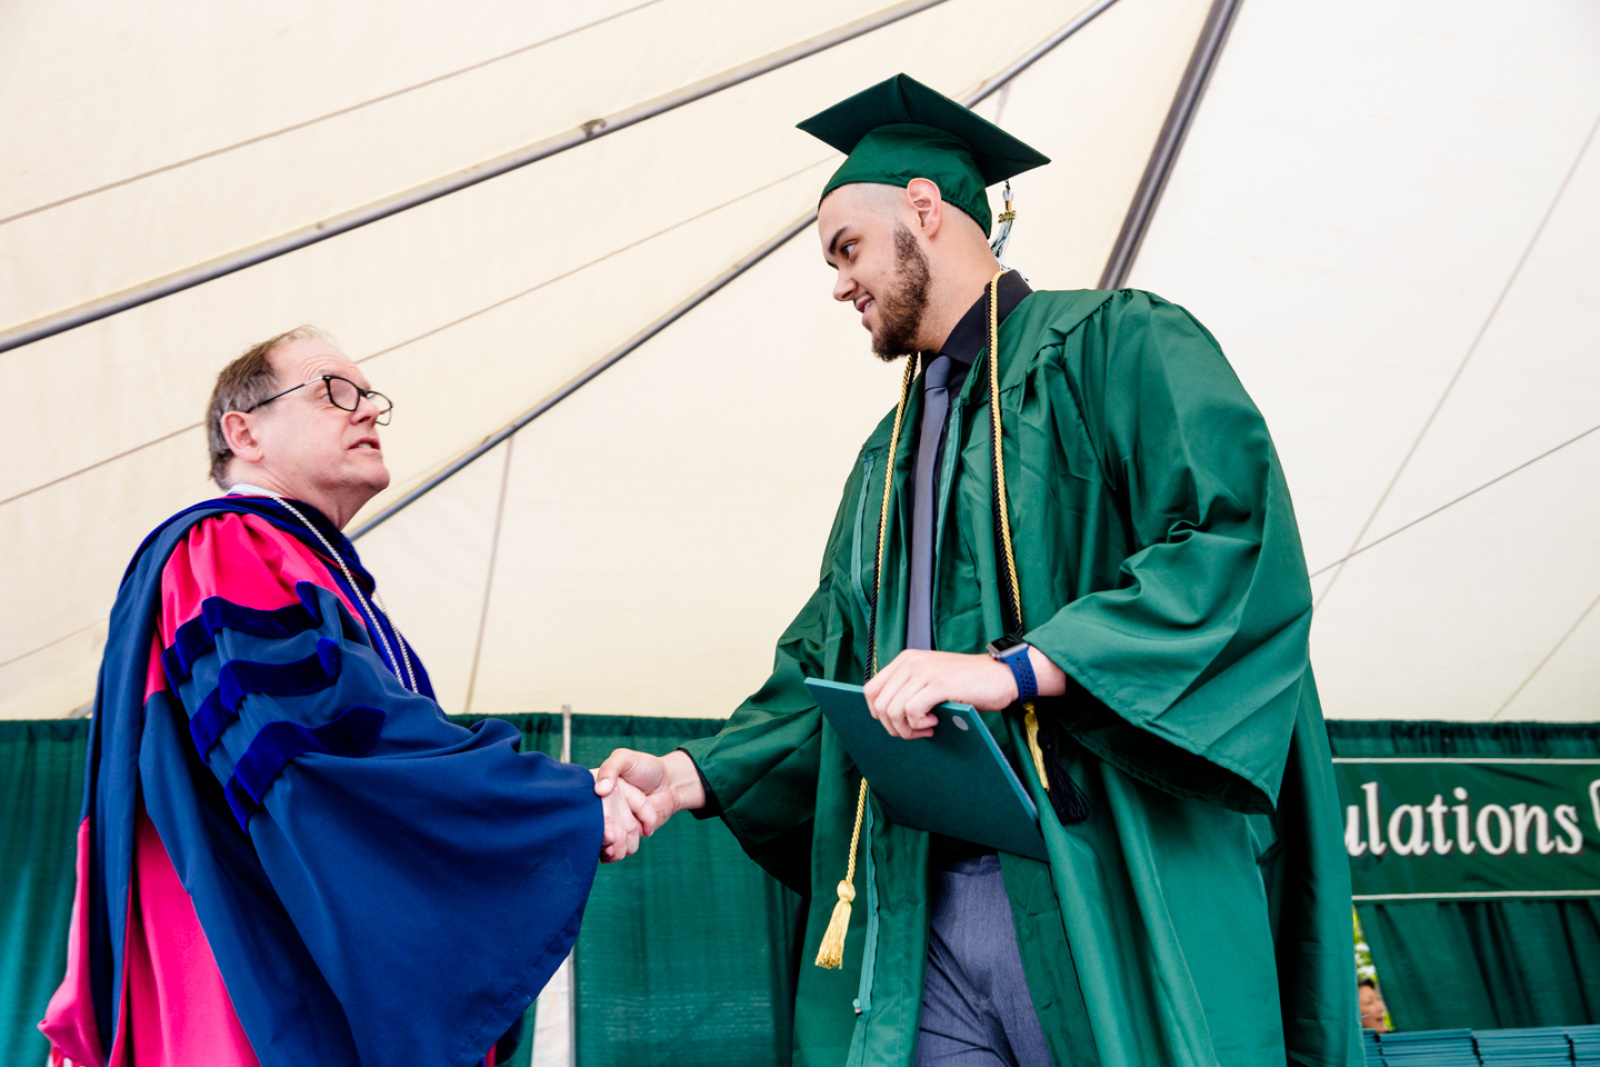 Evergreen President George Bridges hands out a diploma at the 2018 commencement ceremony